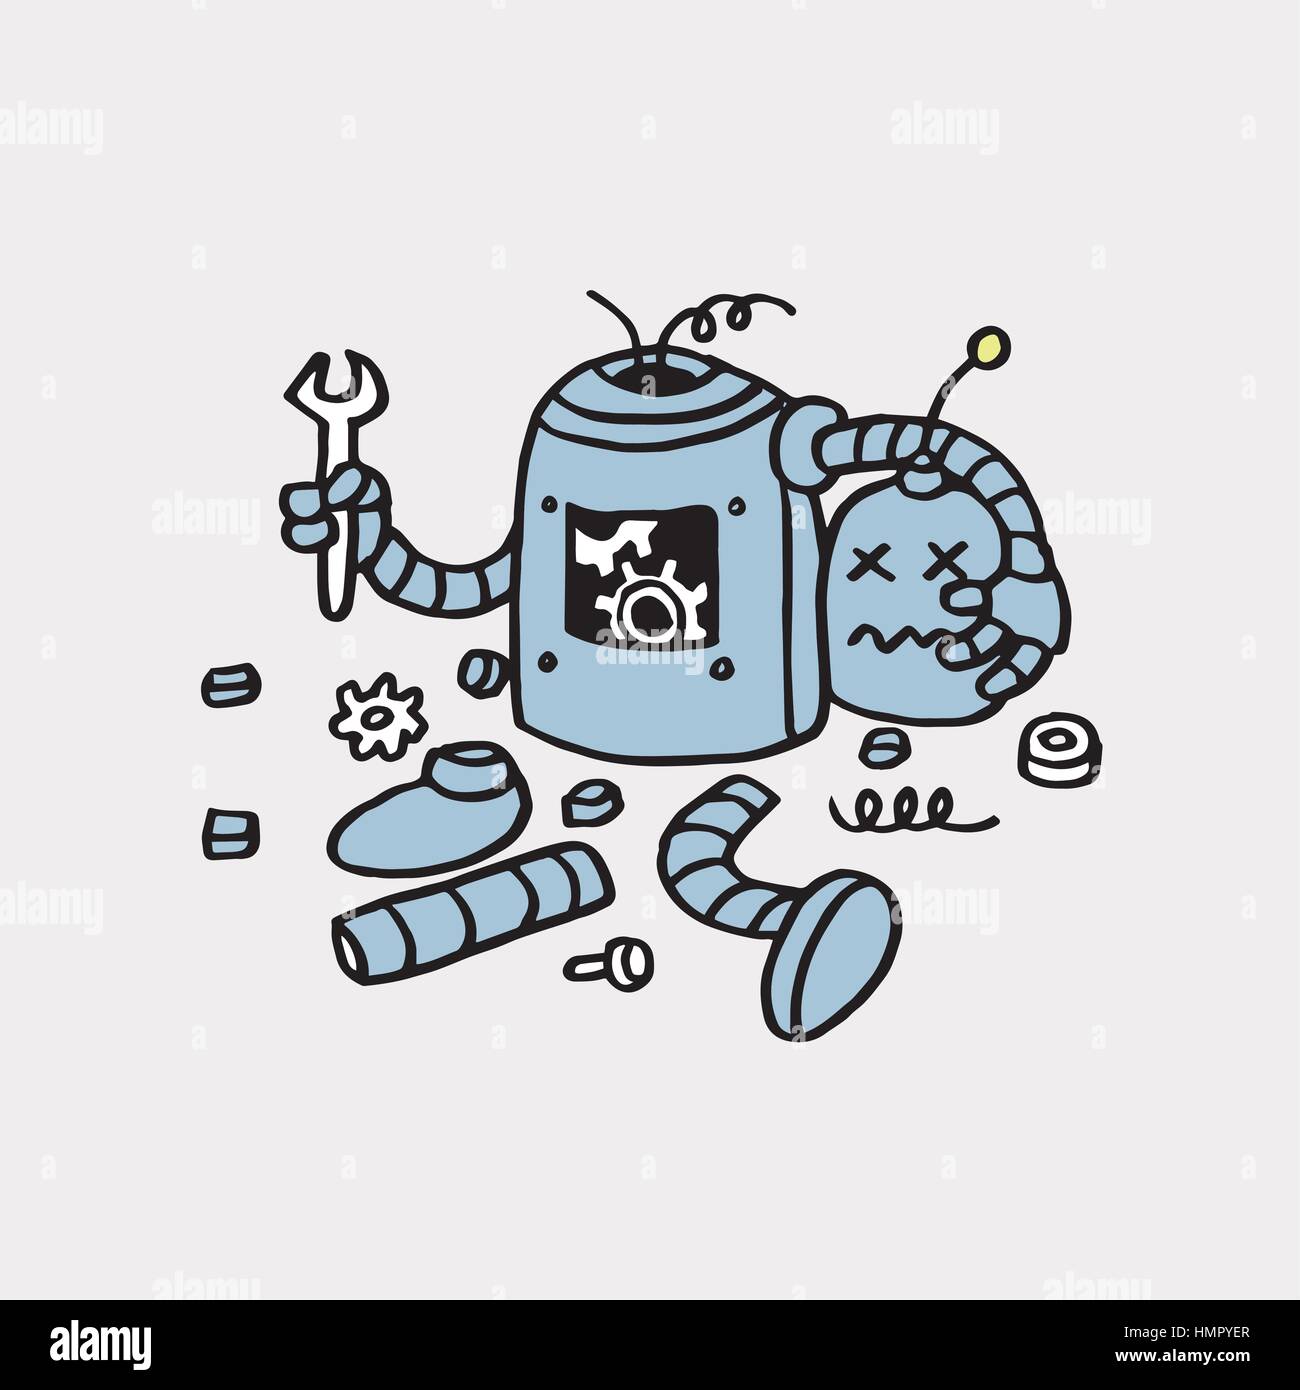 Broken Robot High Resolution Stock Photography and Images - Alamy